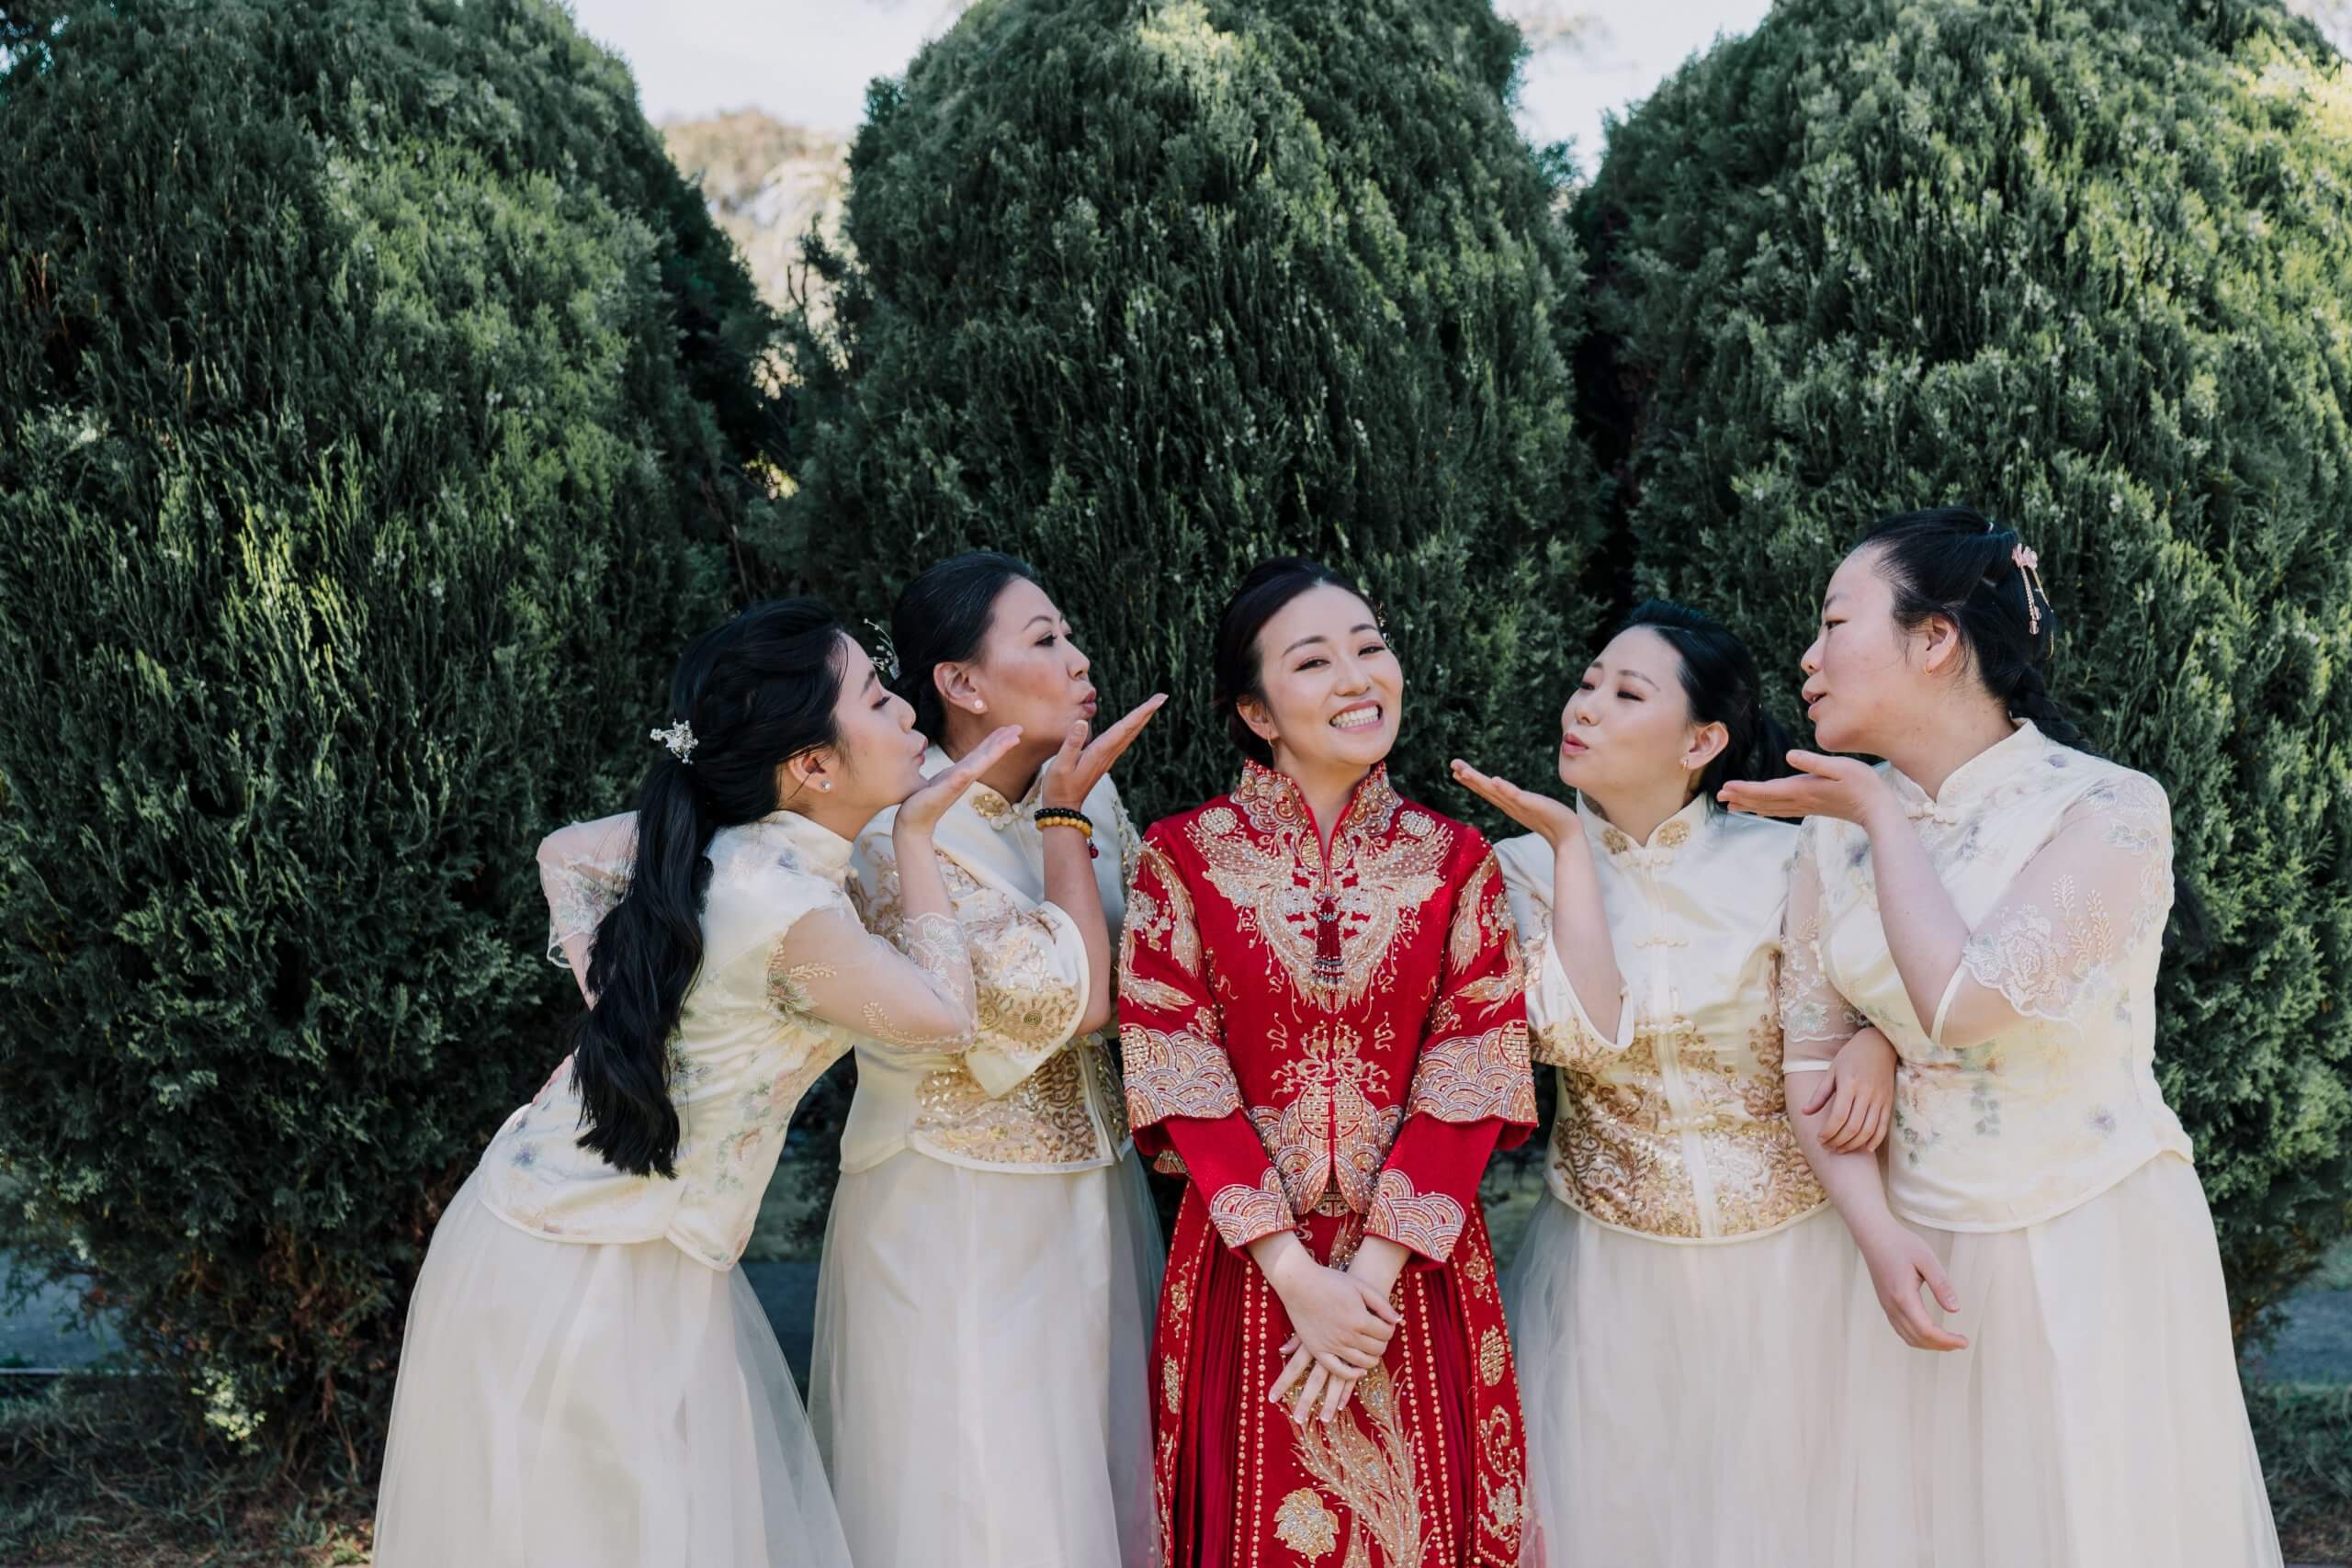 Customise Your Wedding - Bride wearing a traditional Chinese wedding dress, surrounded by her 4 bridesmaids who are blowing her kisses.